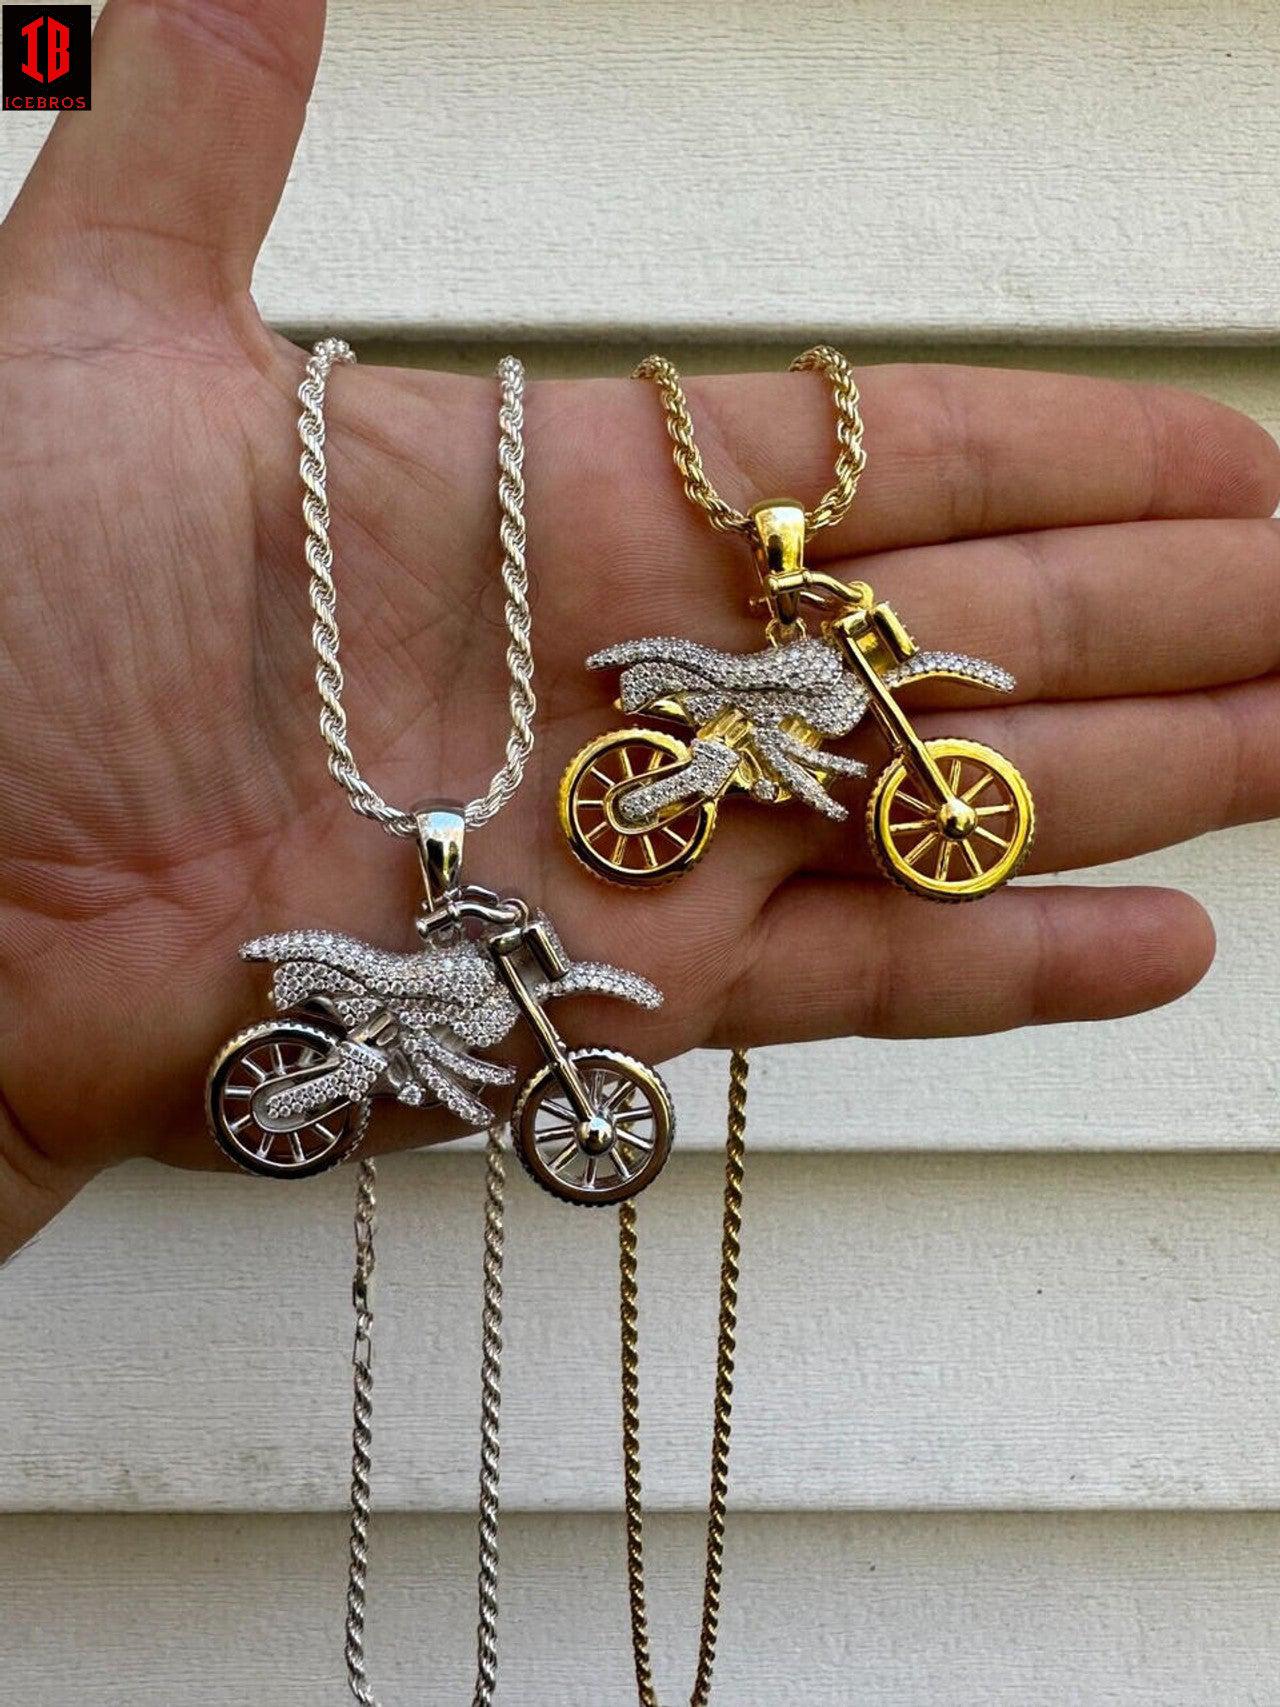 Hand Model Showing 14k White and Yellow Gold Motorcycle Dirt Bike  Pendant Necklace Hanging On Mens hand Showcasing the Rope Chain and Pendant